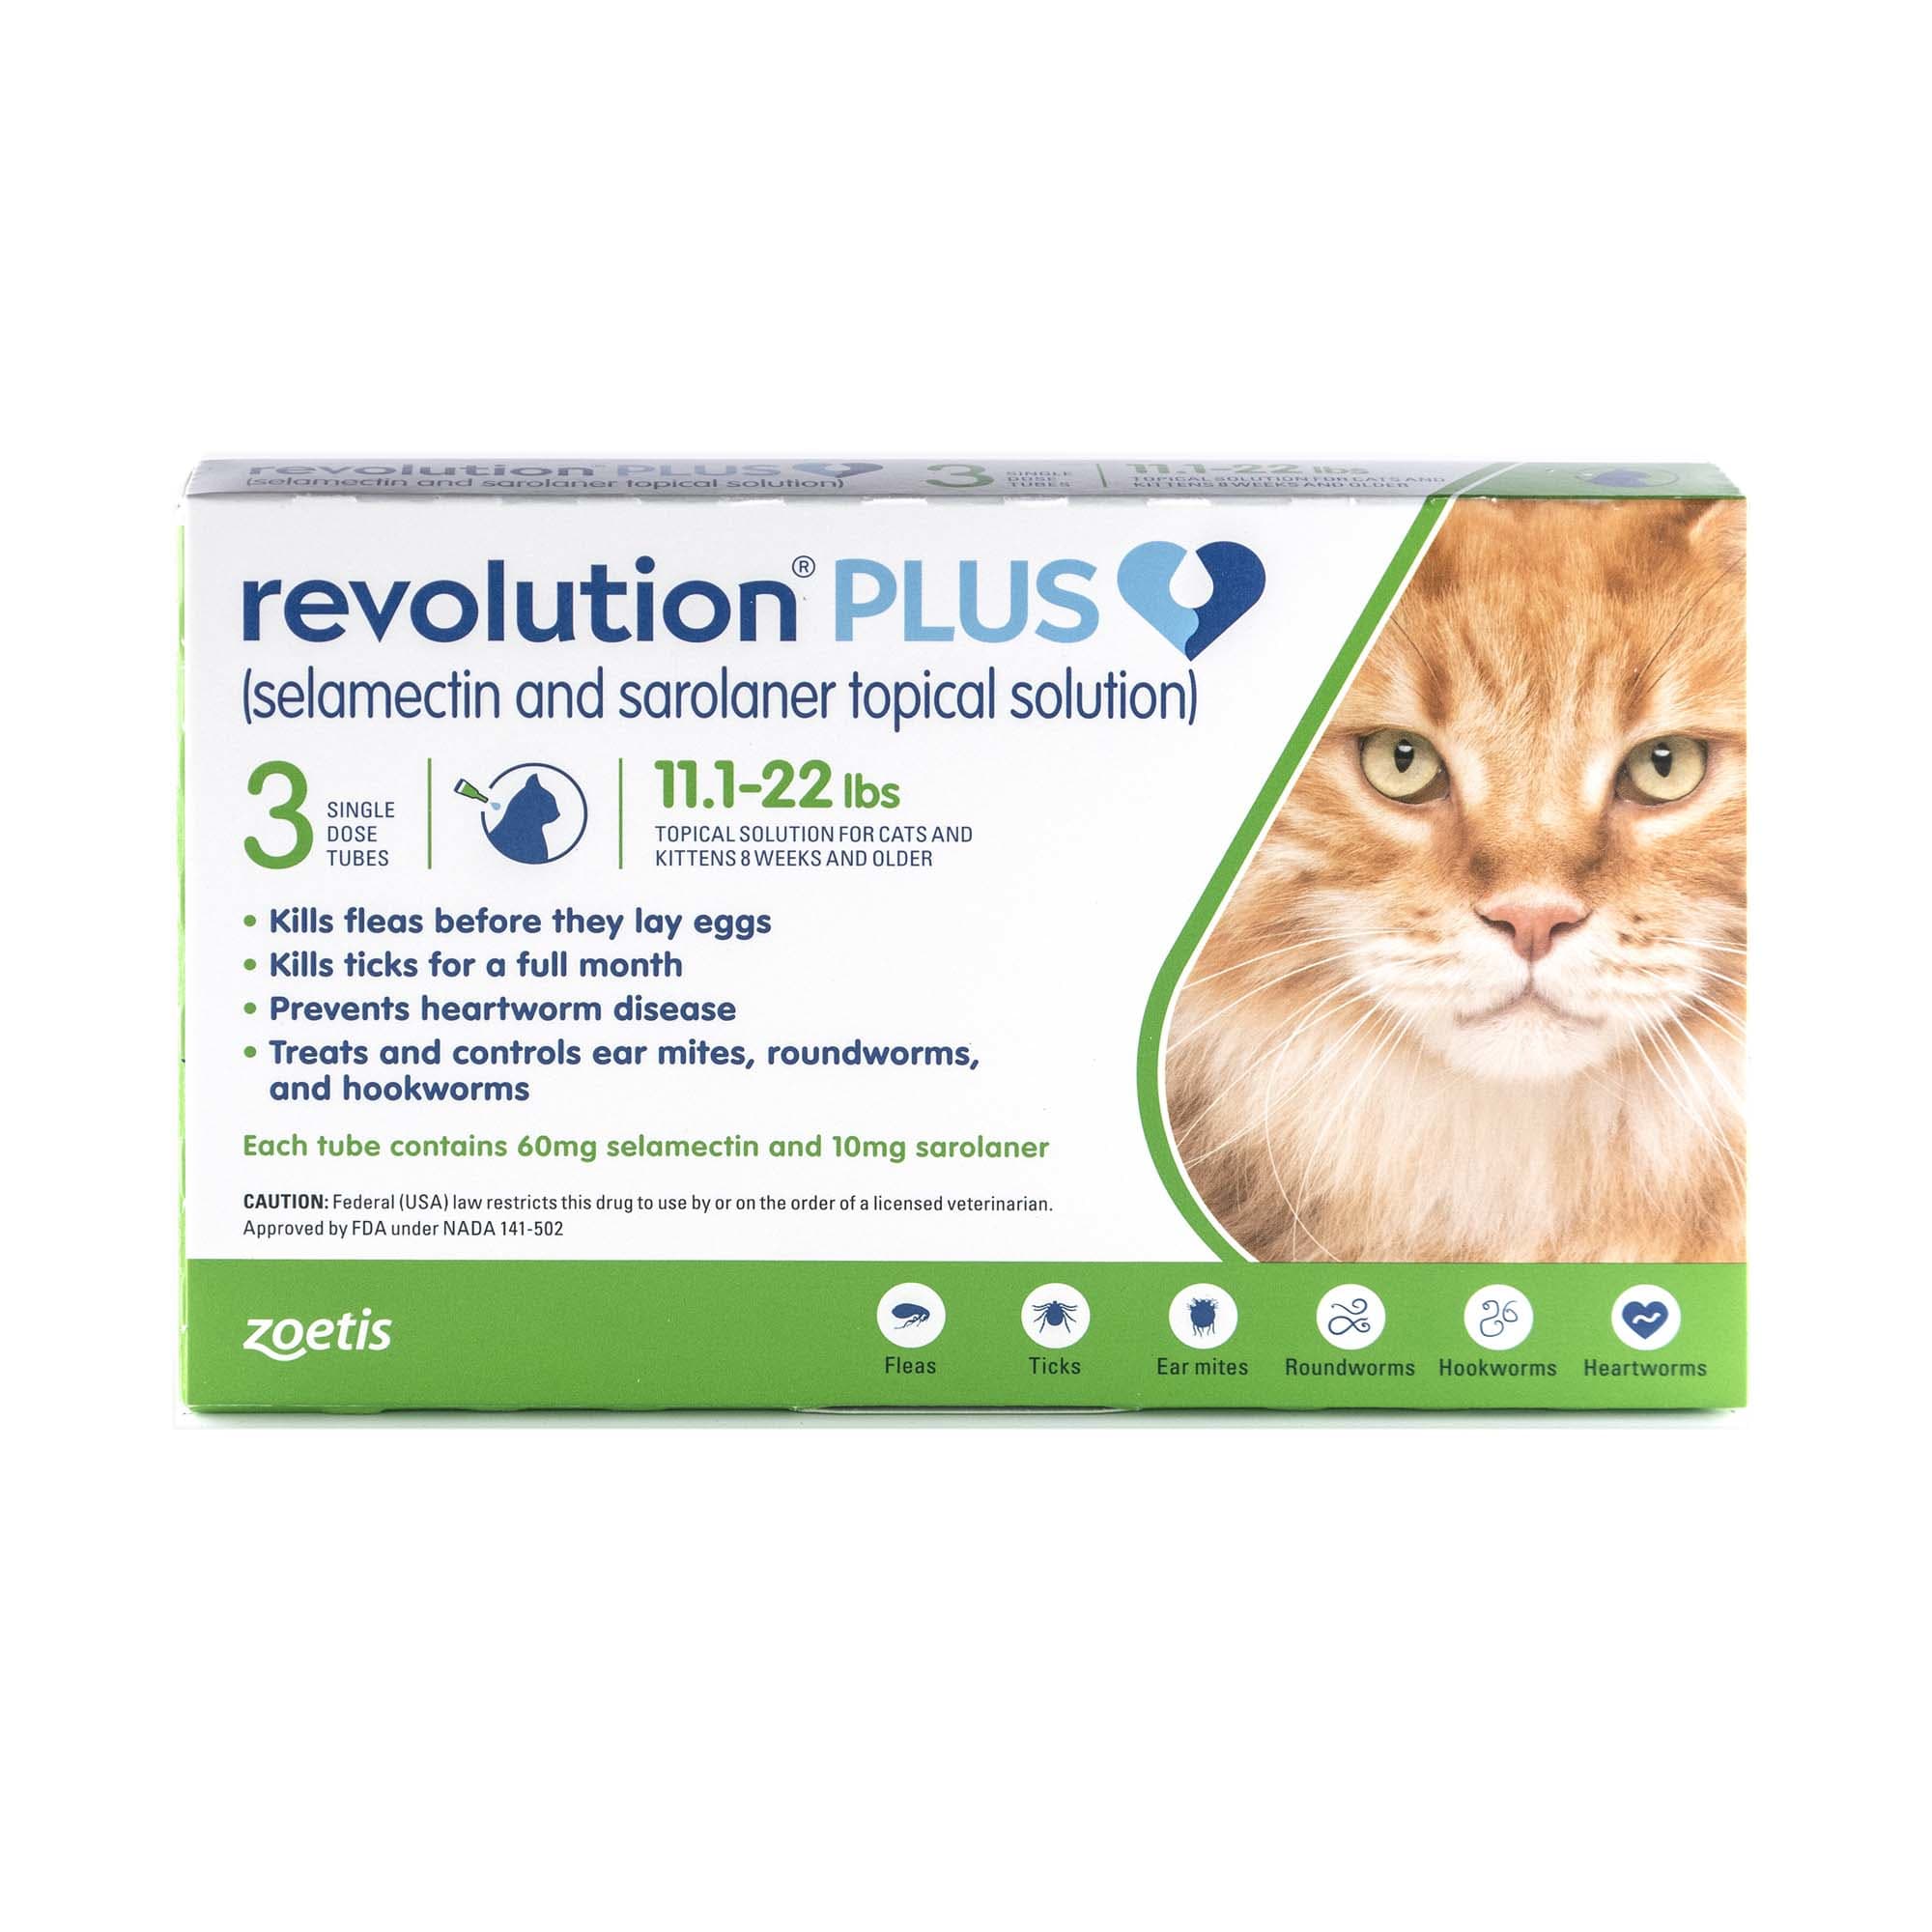 Revolution Plus Topical Solution 11 1 22lbs Cat 6 Month Supply Petco